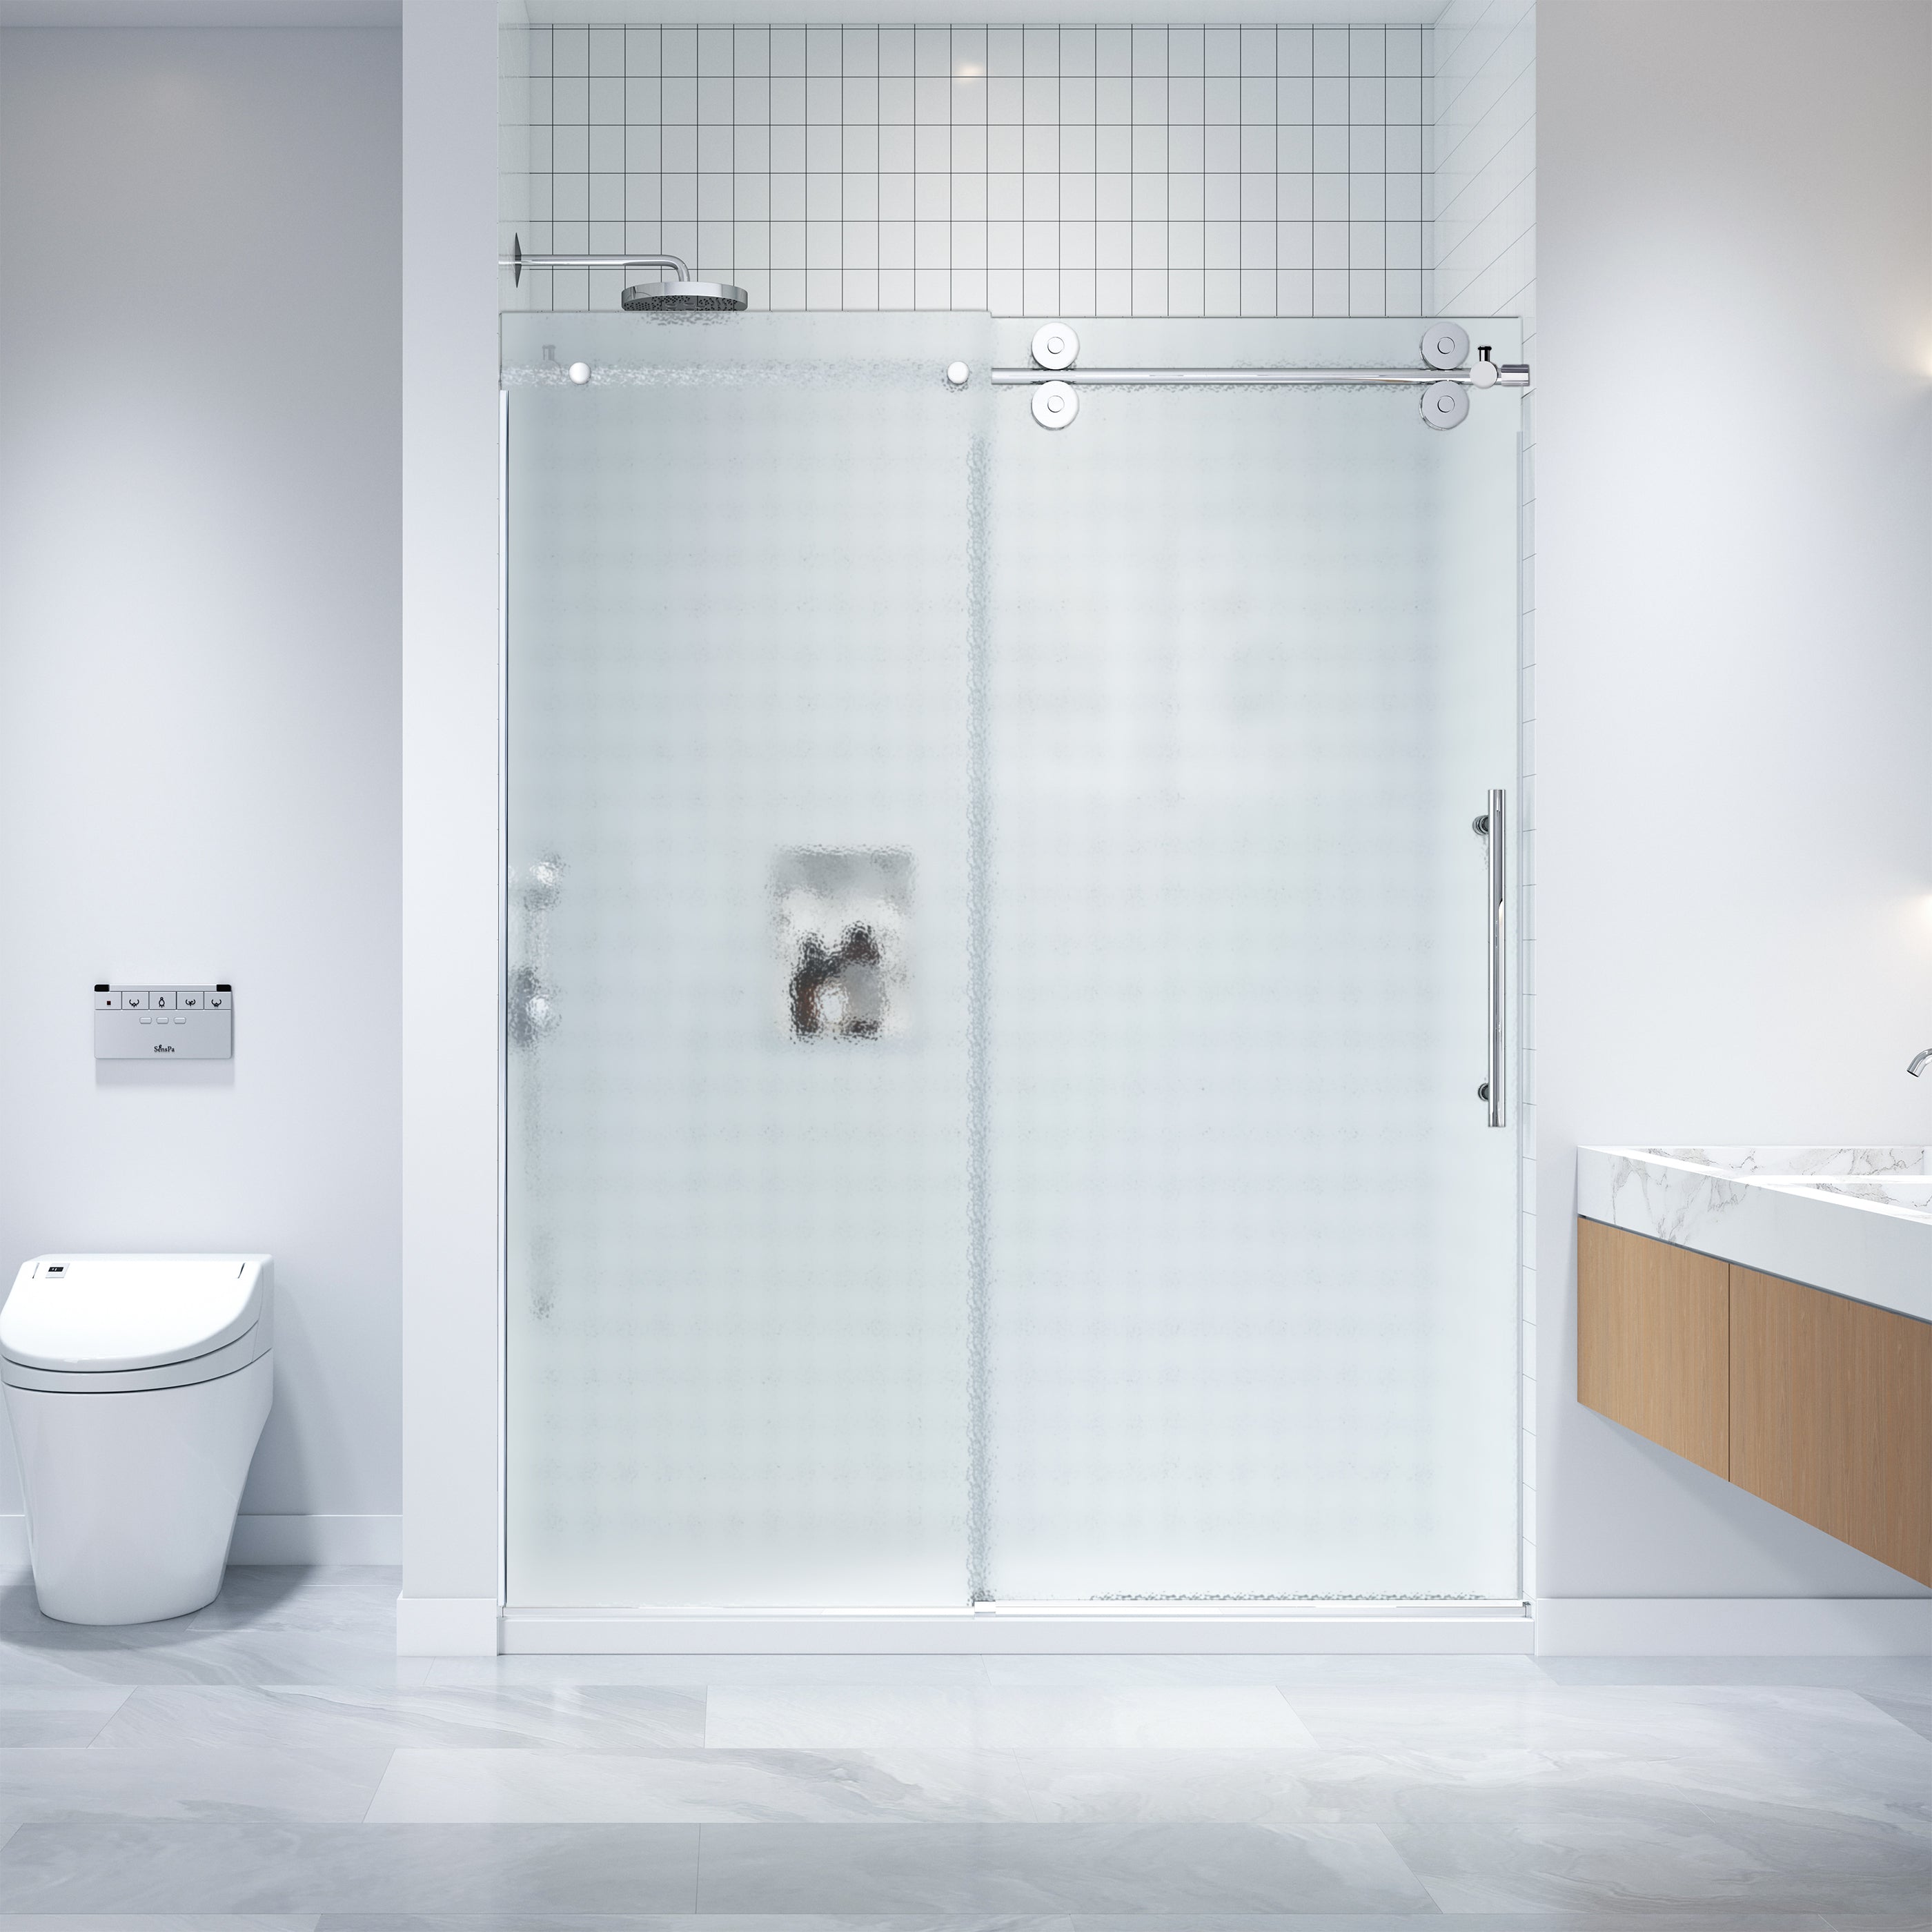 Dreamwerks 60 in. W x 79 in. H Frameless Sliding Shower Door in Bright Chrome with Frosted Glass